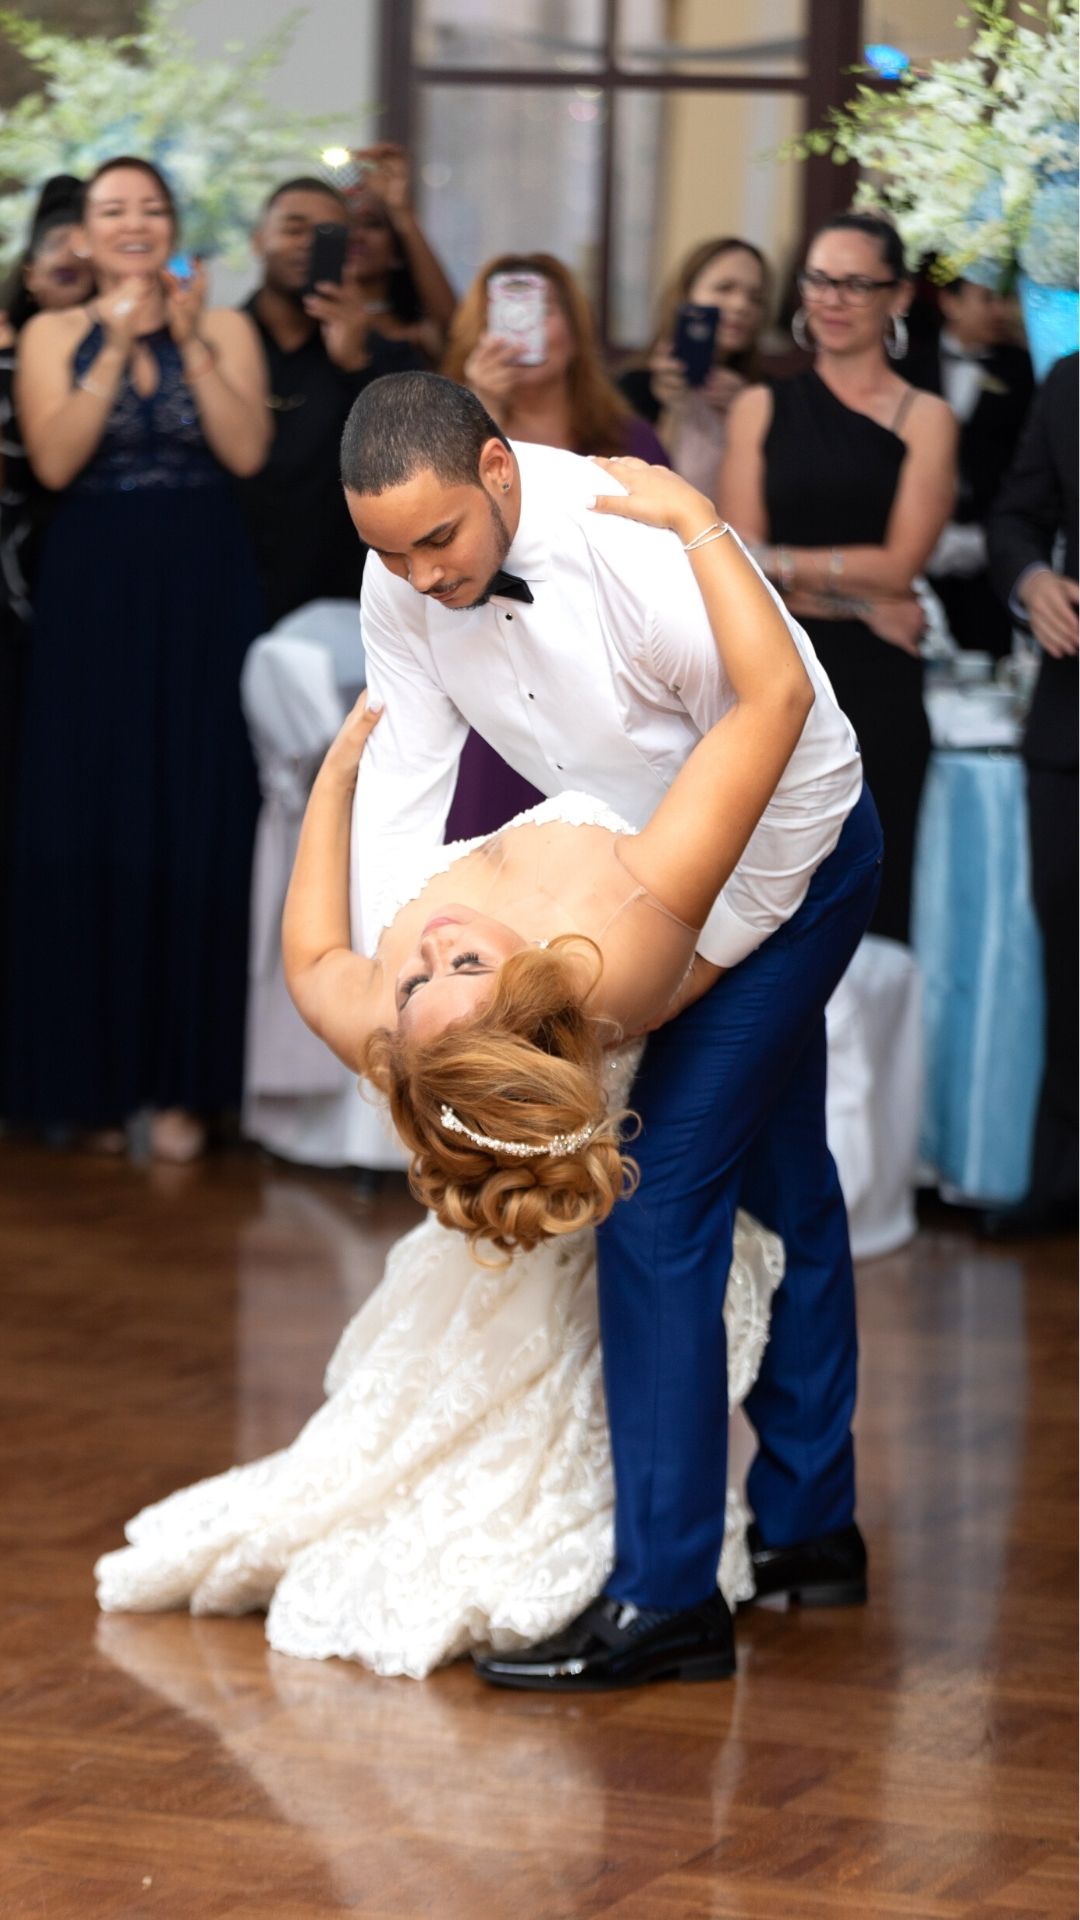 Don't Make These Mistakes When Planning Your First Dance - wedding photography 2